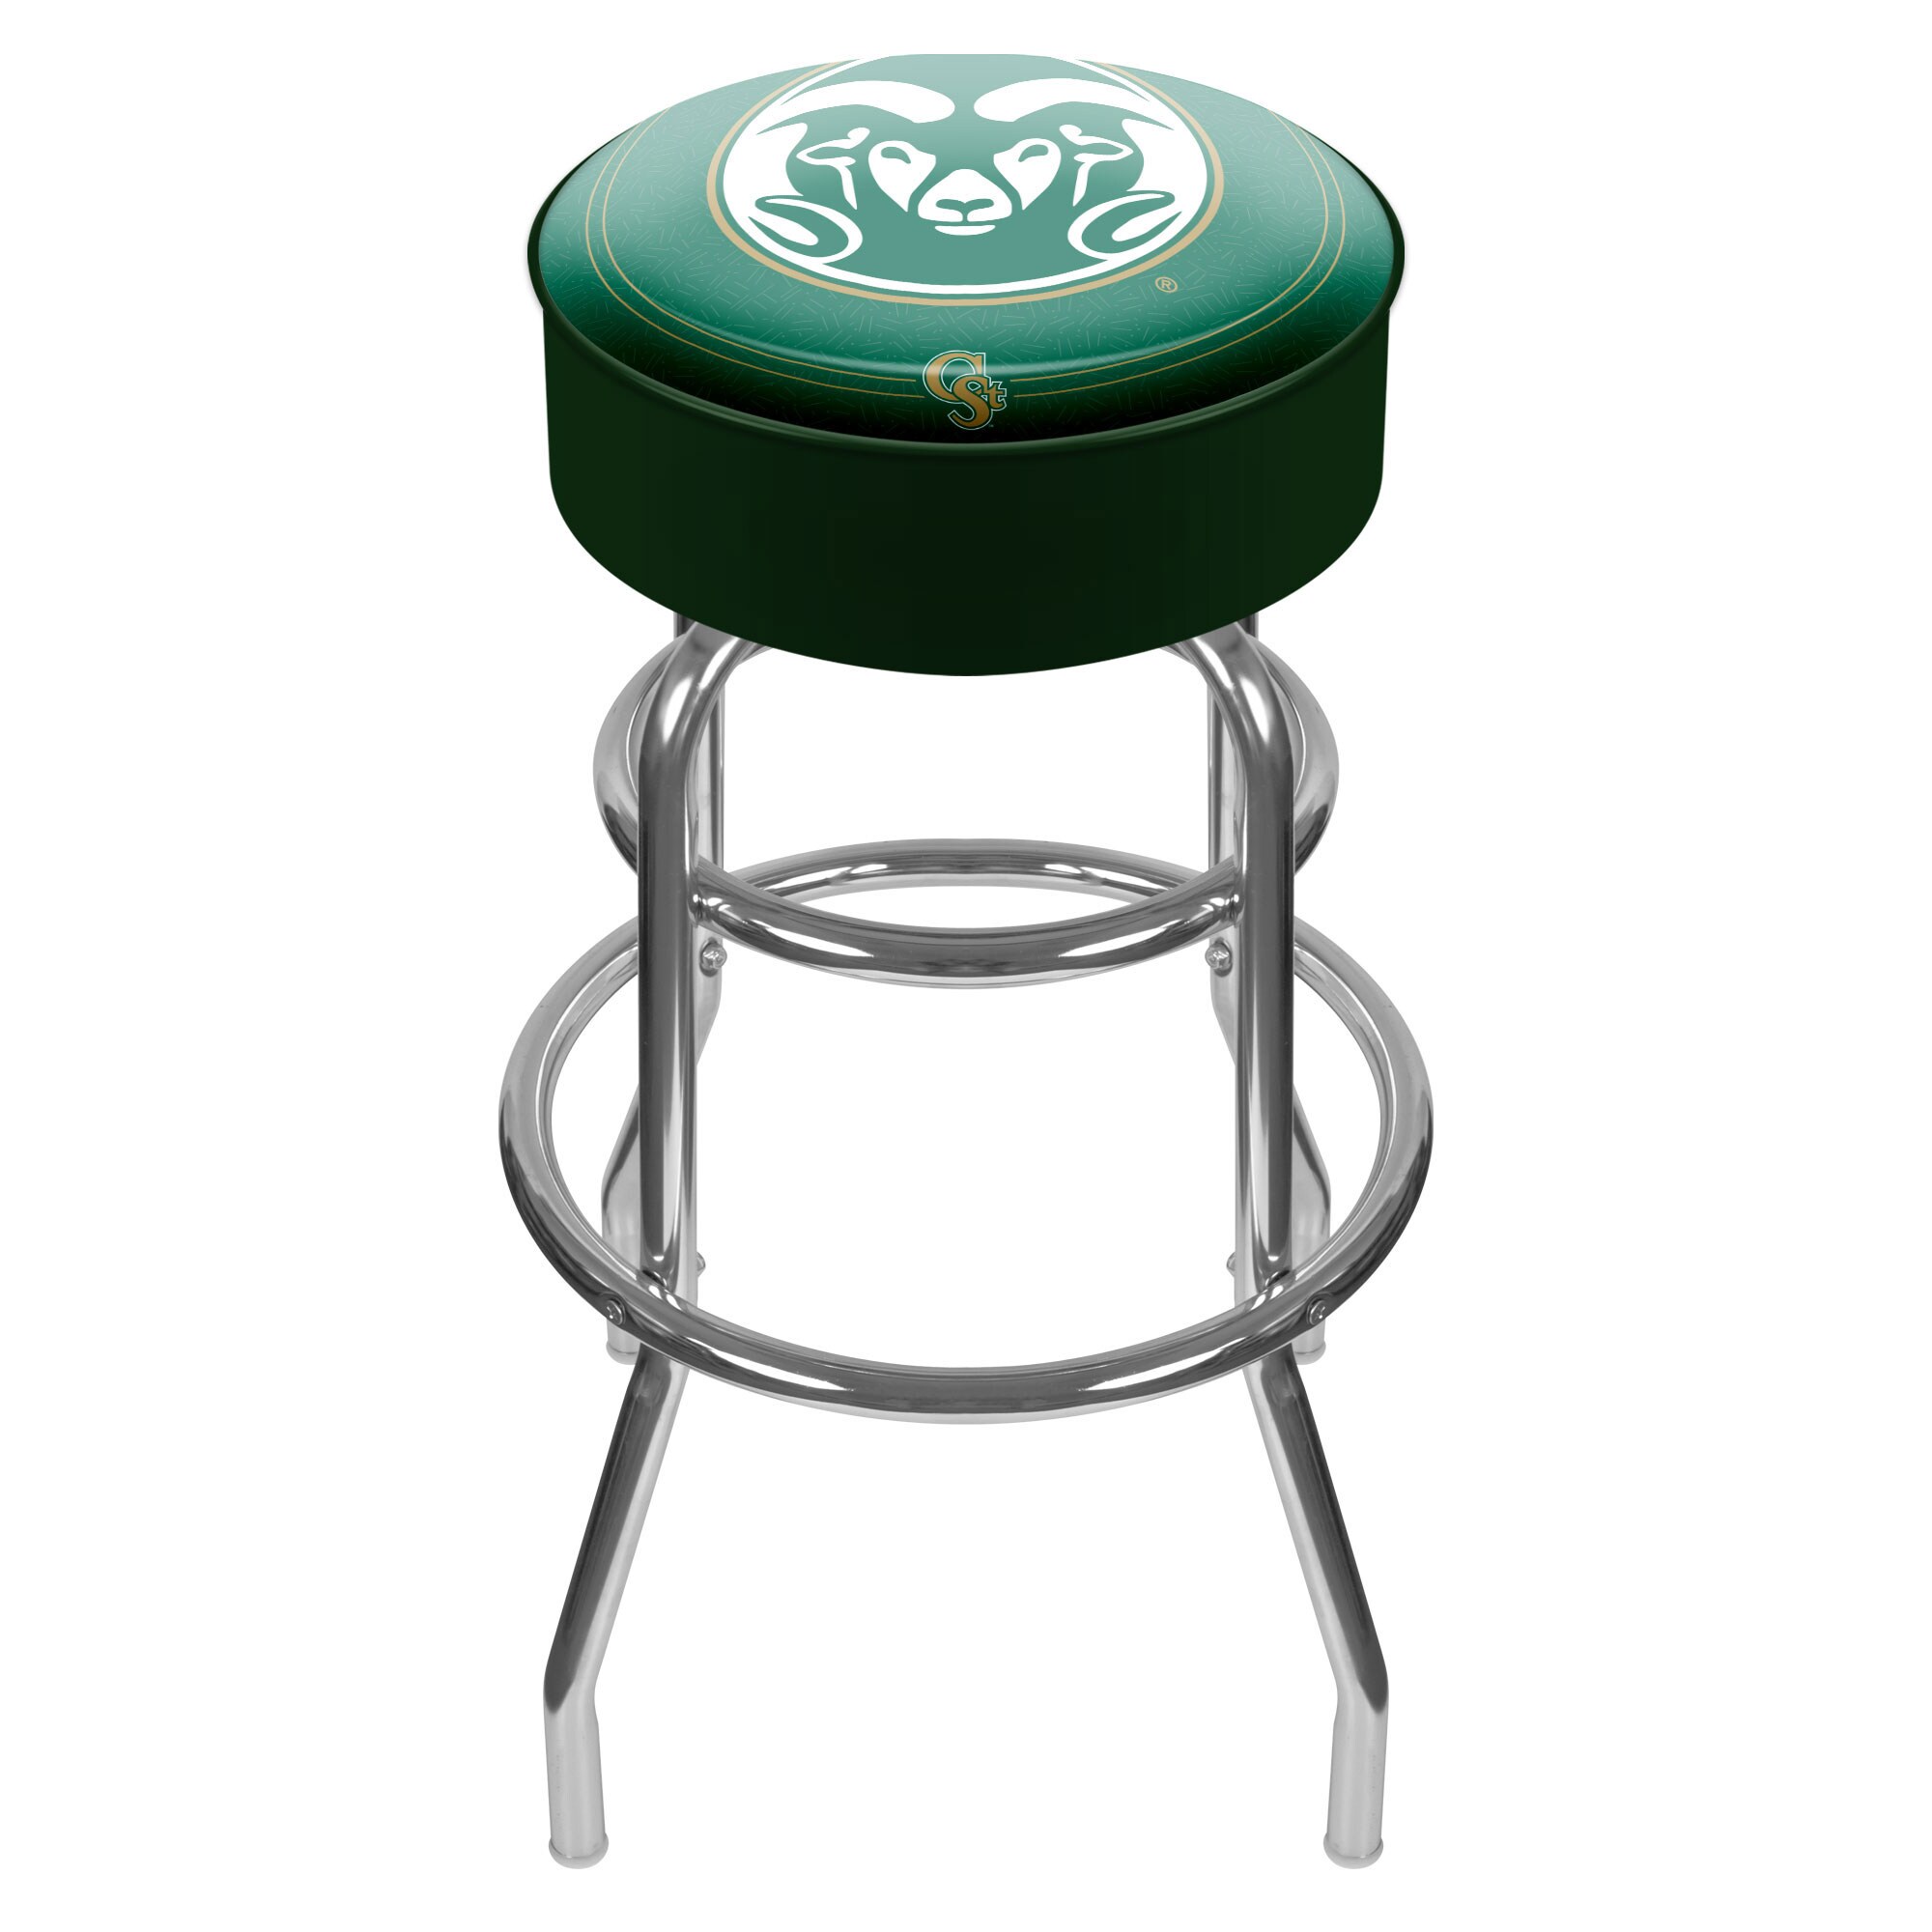 Trademark Gameroom Colorado State Rams Bar Stools Chrome Bar height (27-in to 35-in) Upholstered Swivel Bar Stool | CLC1000-COST